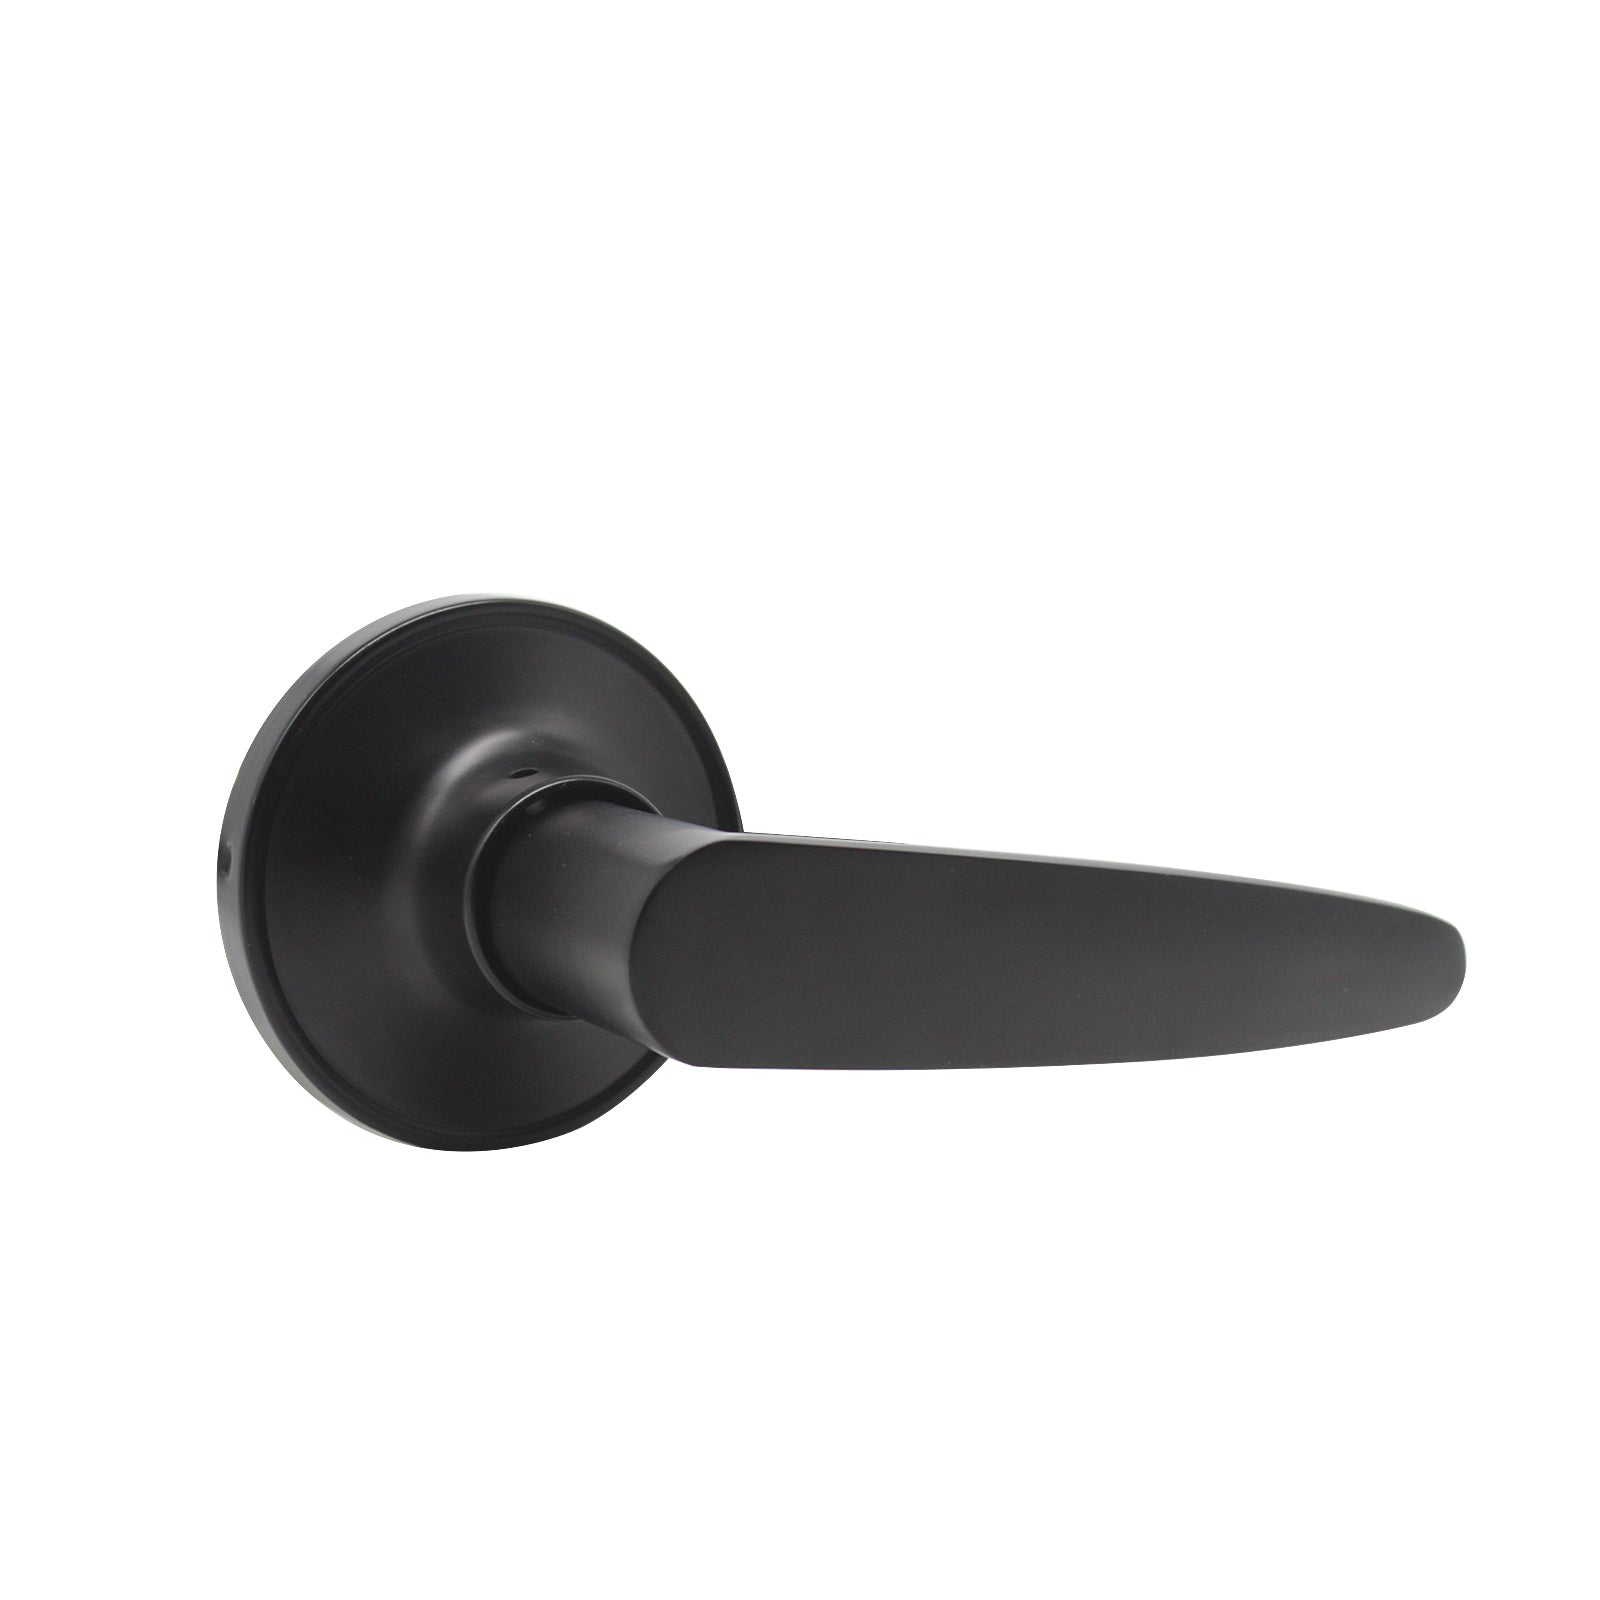 Passage Door Lever set for Closet and Hall, Leaf Style, Black Finish - Probrico